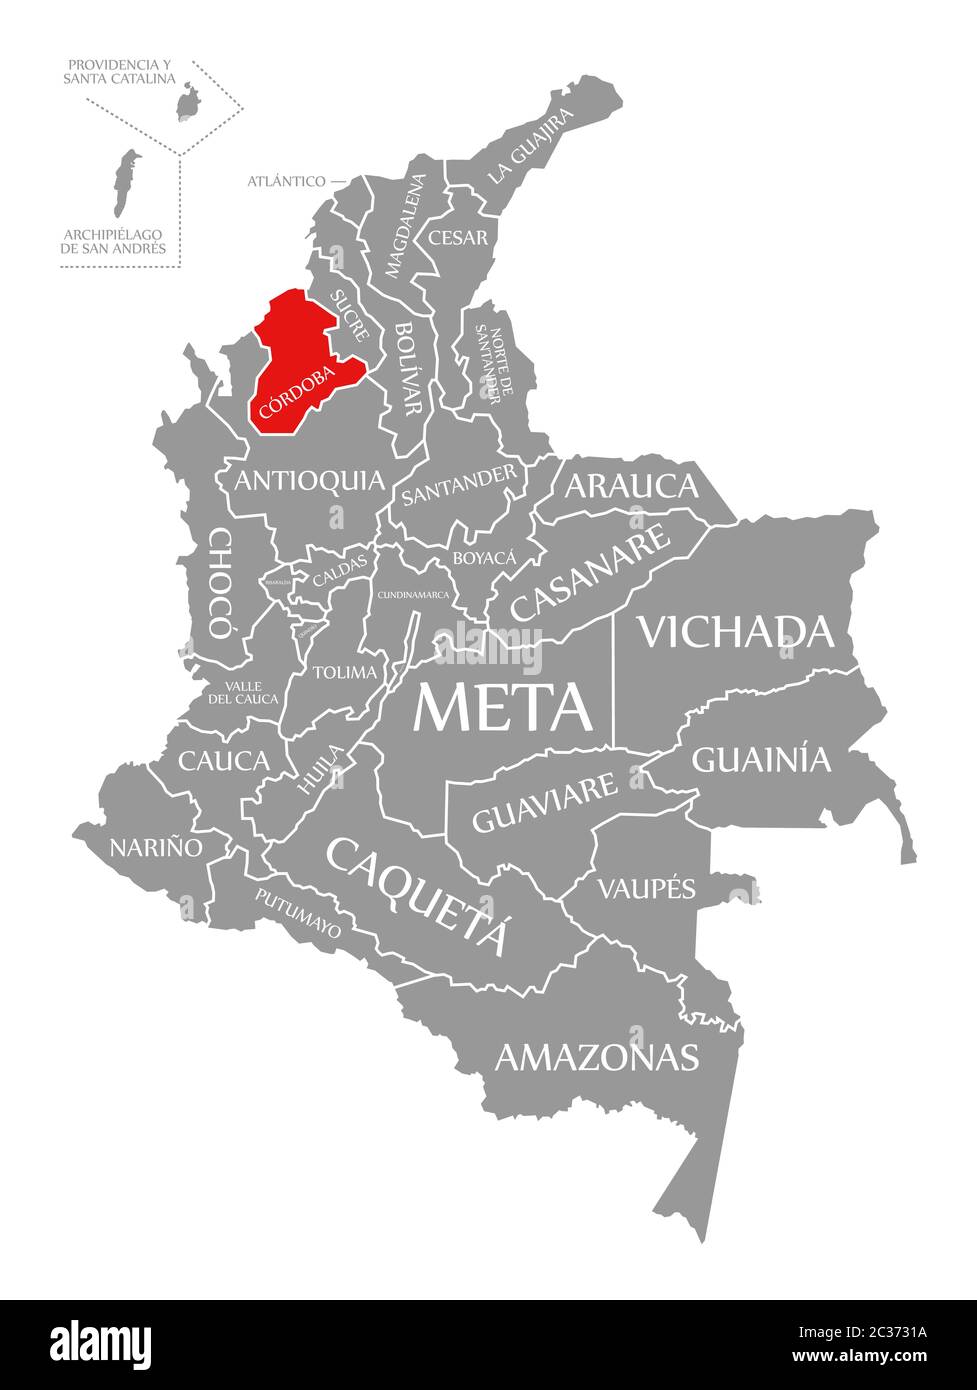 Cordoba red highlighted in map of Colombia Stock Photo